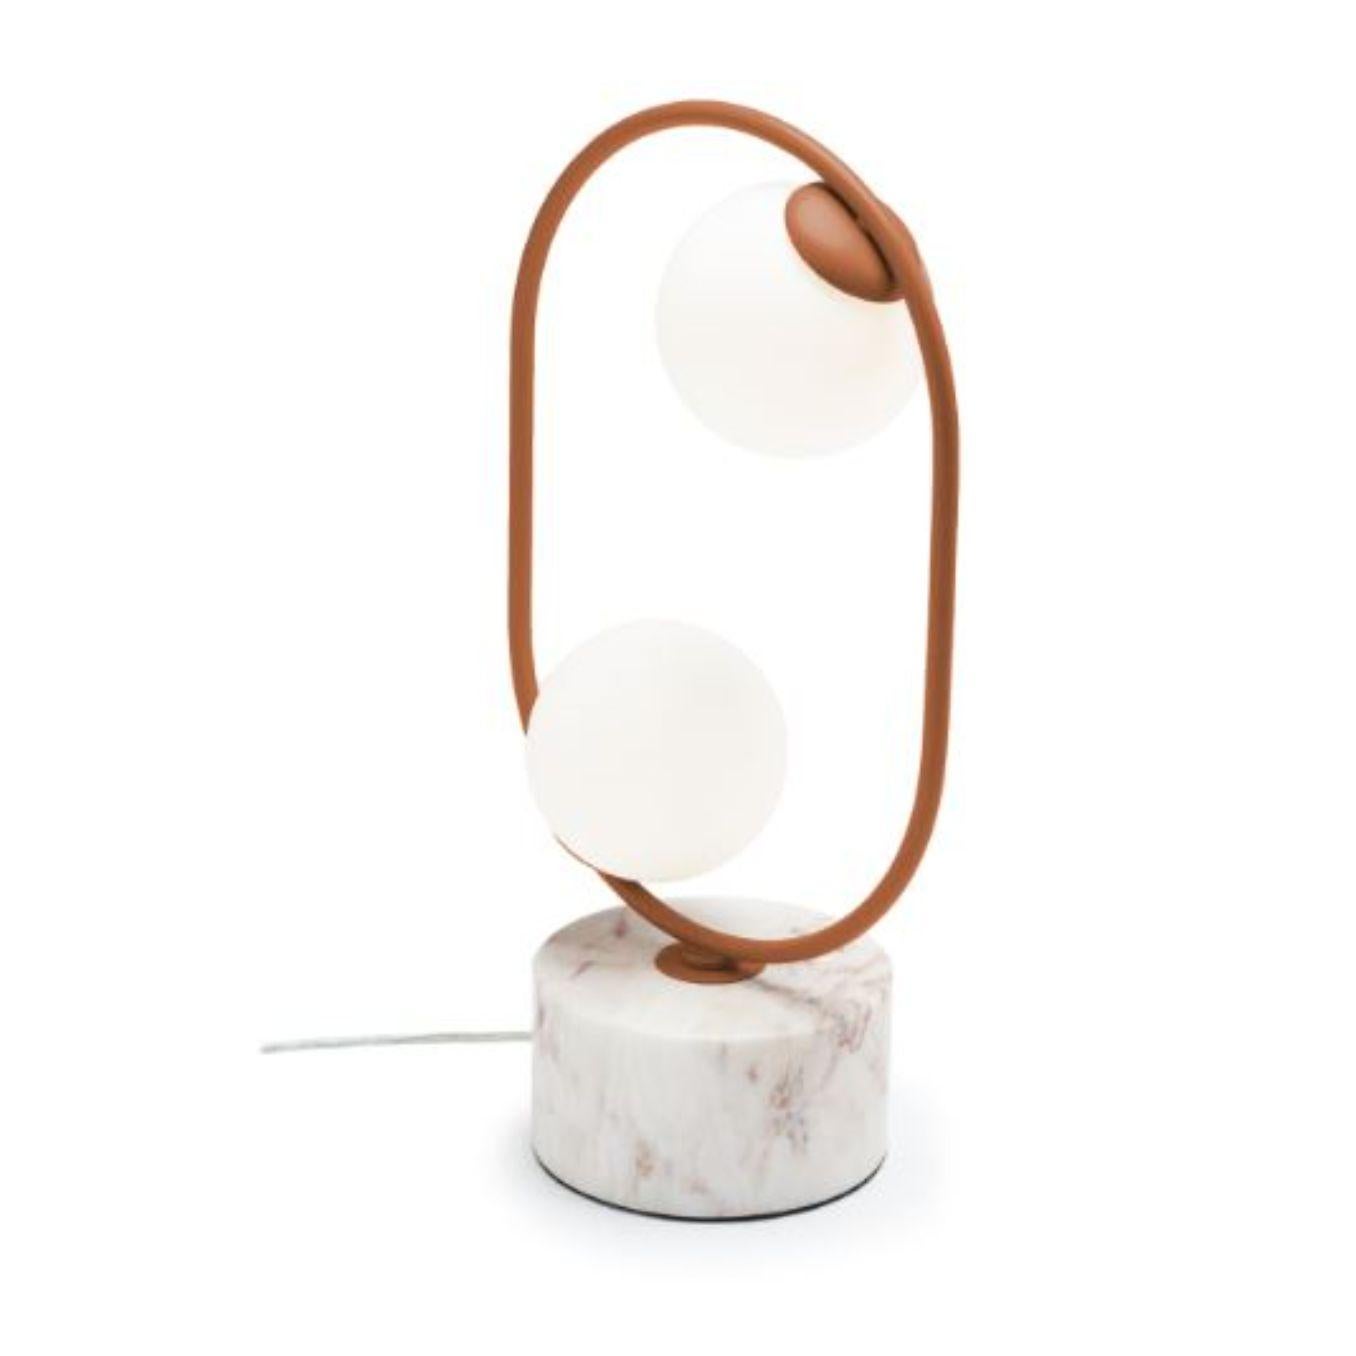 Copper loop table I lamp with marble base by Dooq
Dimensions: W 30 x D 15 x H 50 cm
Materials: lacquered metal, polished or brushed metal, copper, marble. 
Also available in different colours and materials.

Information:
230V/50Hz
2 x max.